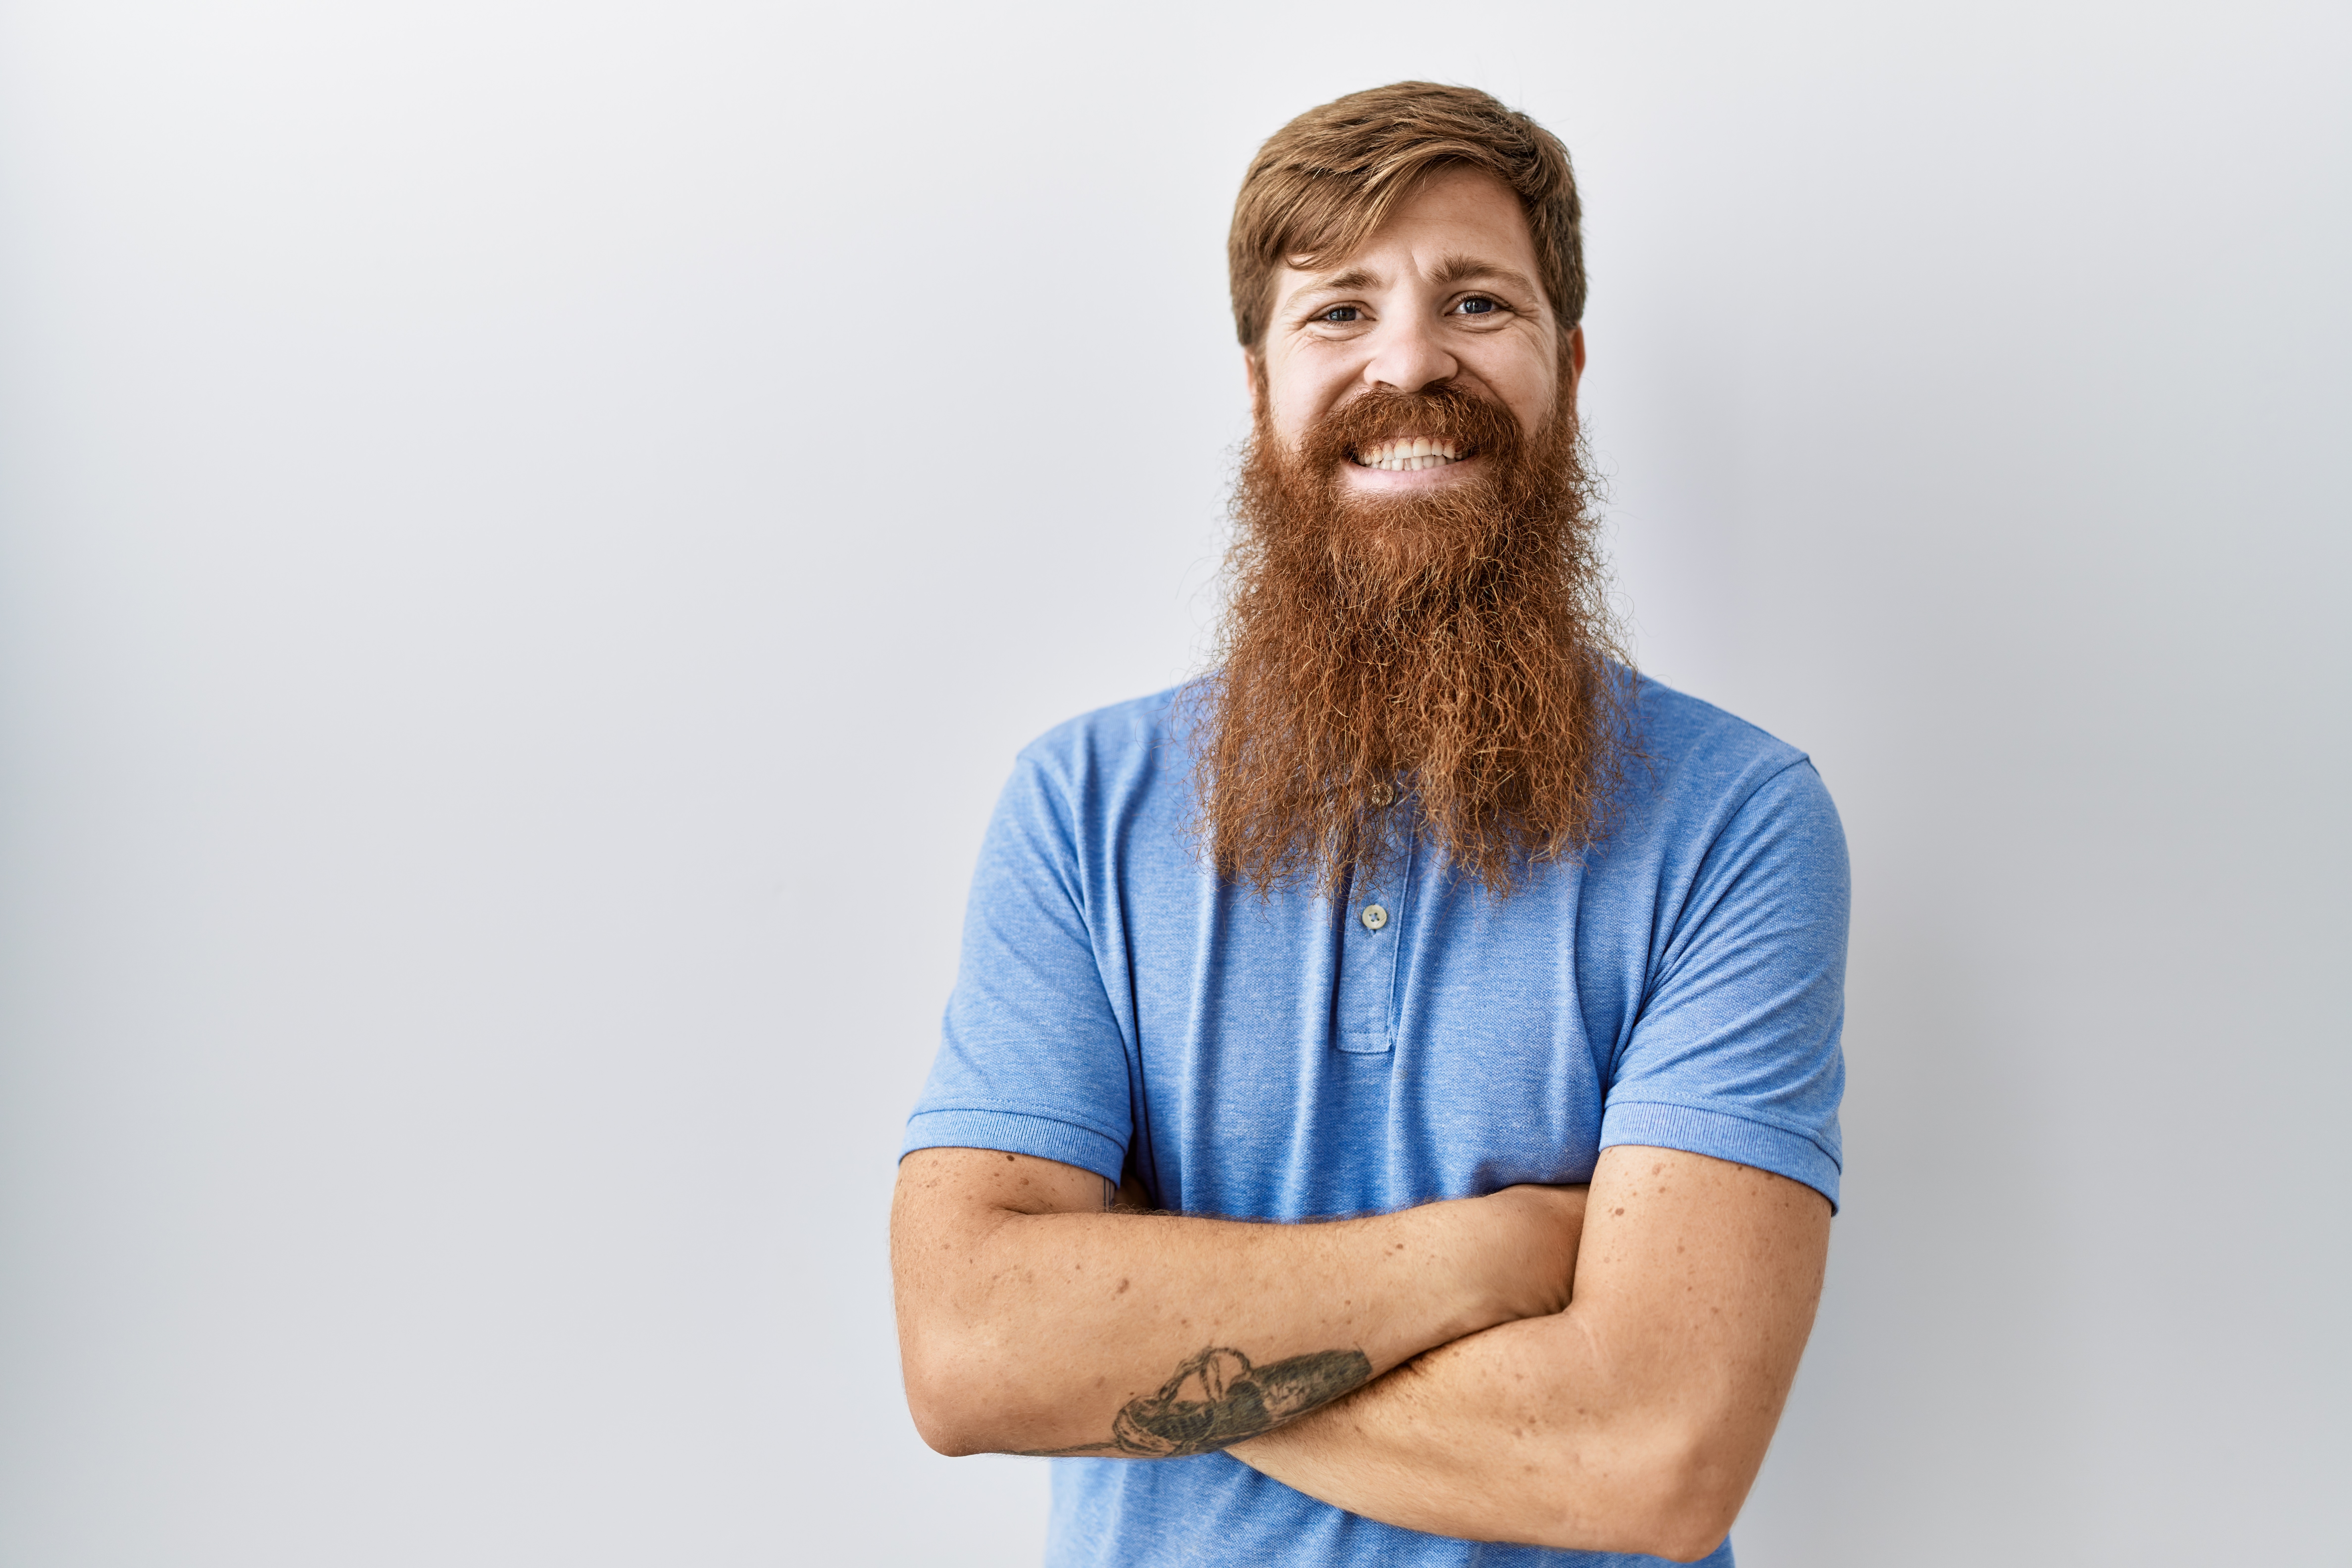 A mean with a long beard smiling | Source: Shutterstock